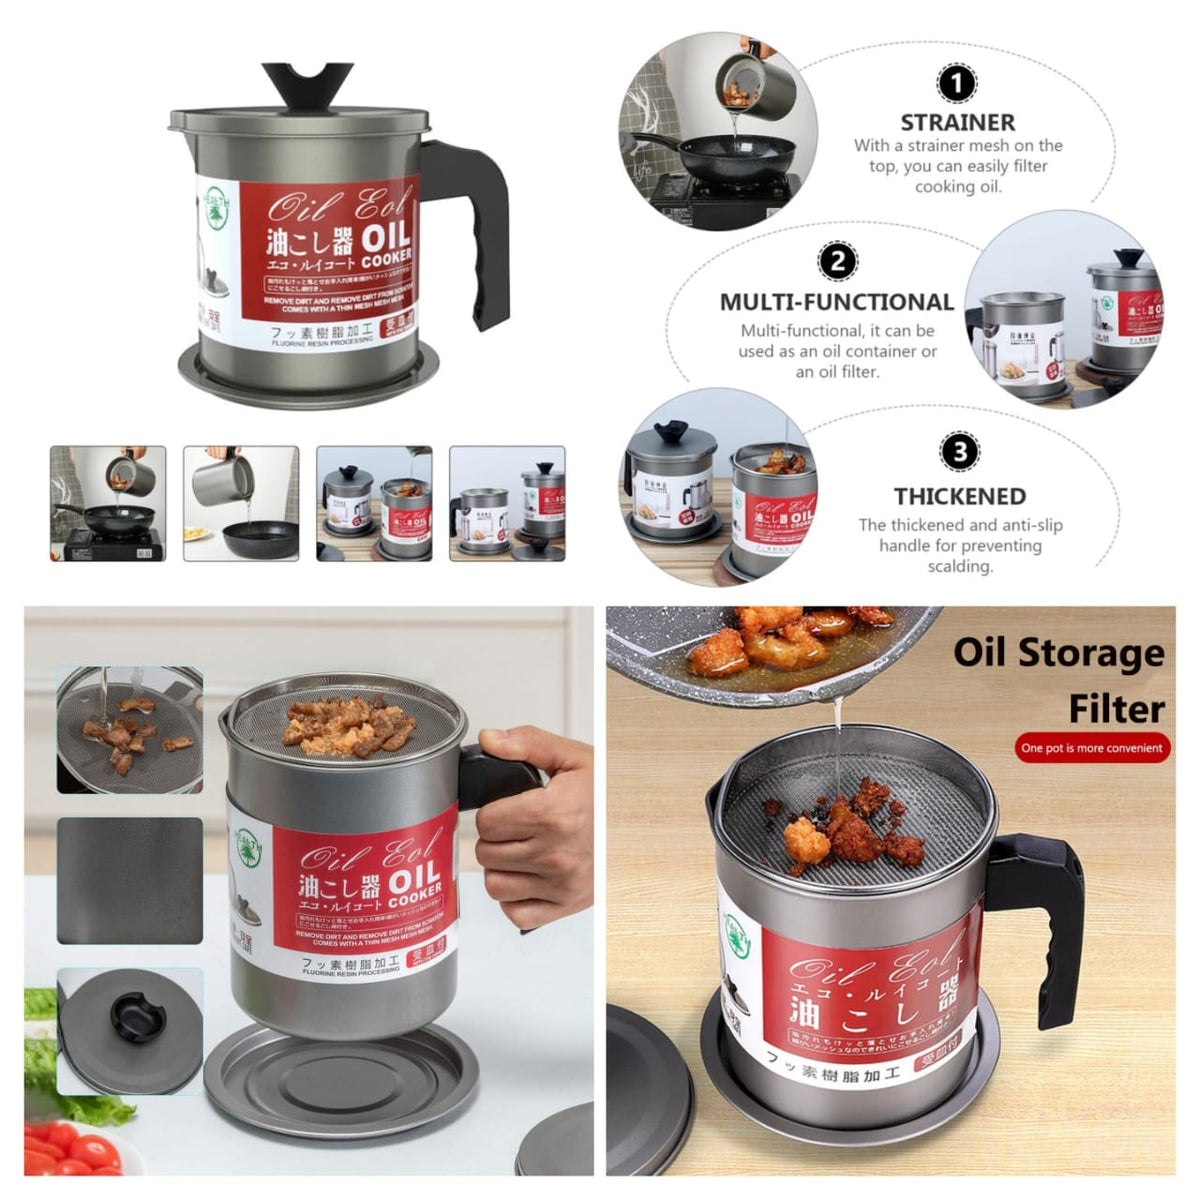 Oil Fryer Cookerwith Stainless Steel Fine Mesh